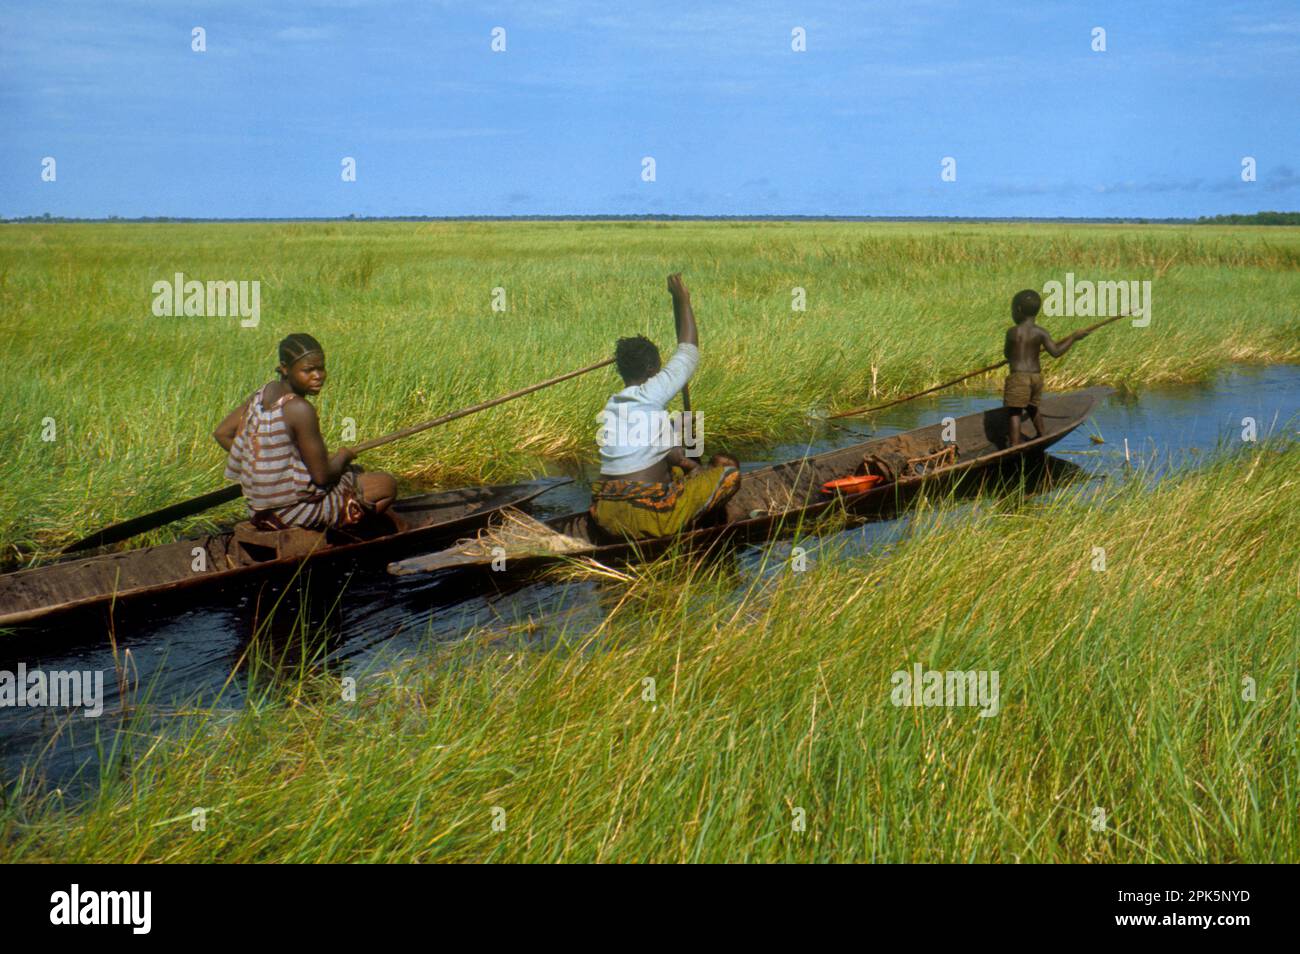 Africa, Democratic Republic of the Congo, Ngiri River area: Women of Libinza ethnic group in canoe in swamp savanna, going to swamp forest to fish and collect drinking water Stock Photo